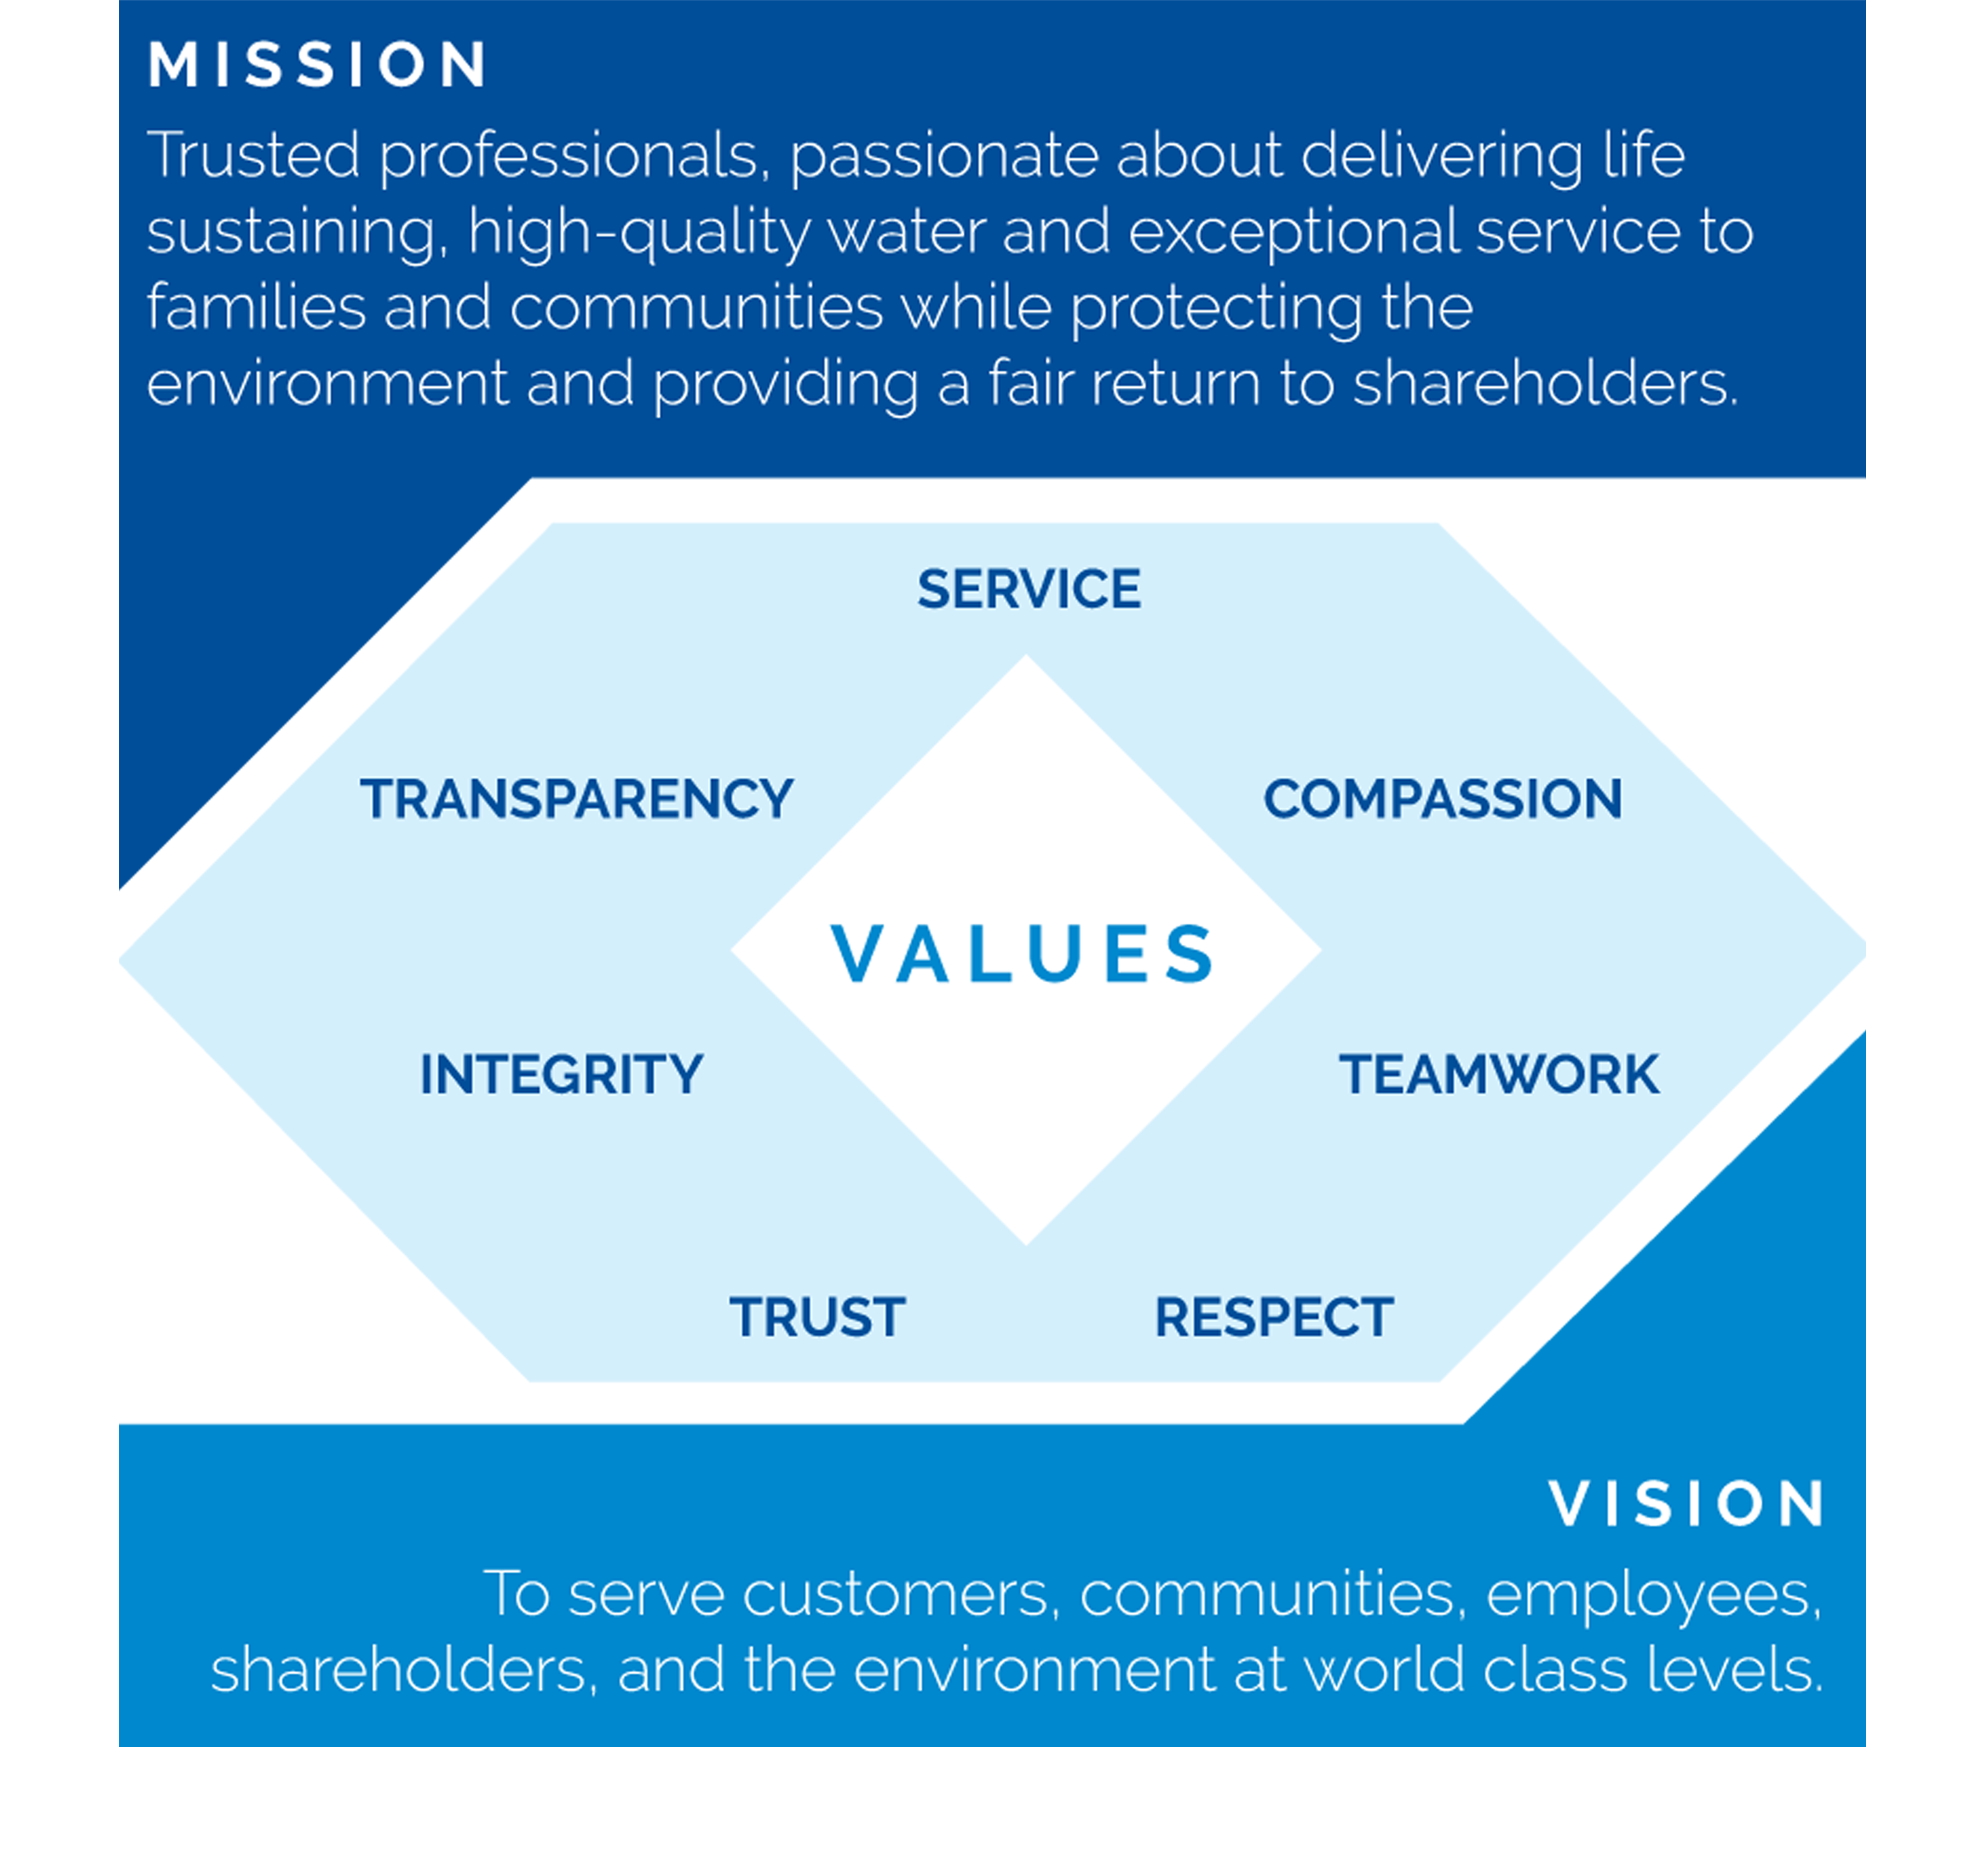 San Jose Water's Mission Values and Vision. Trusted professionals, passionate about delivering life sustaining, high-quality water and exceptional service to families and communities while protecting the environment and providing a fair return to shareholders. San Jose Water's values are service, compassion, teamwork. respect, trust, integrity, and transparency. San Jose Water's vision is to serve customers, communities. employees, shareholders and the environment at world class levels.